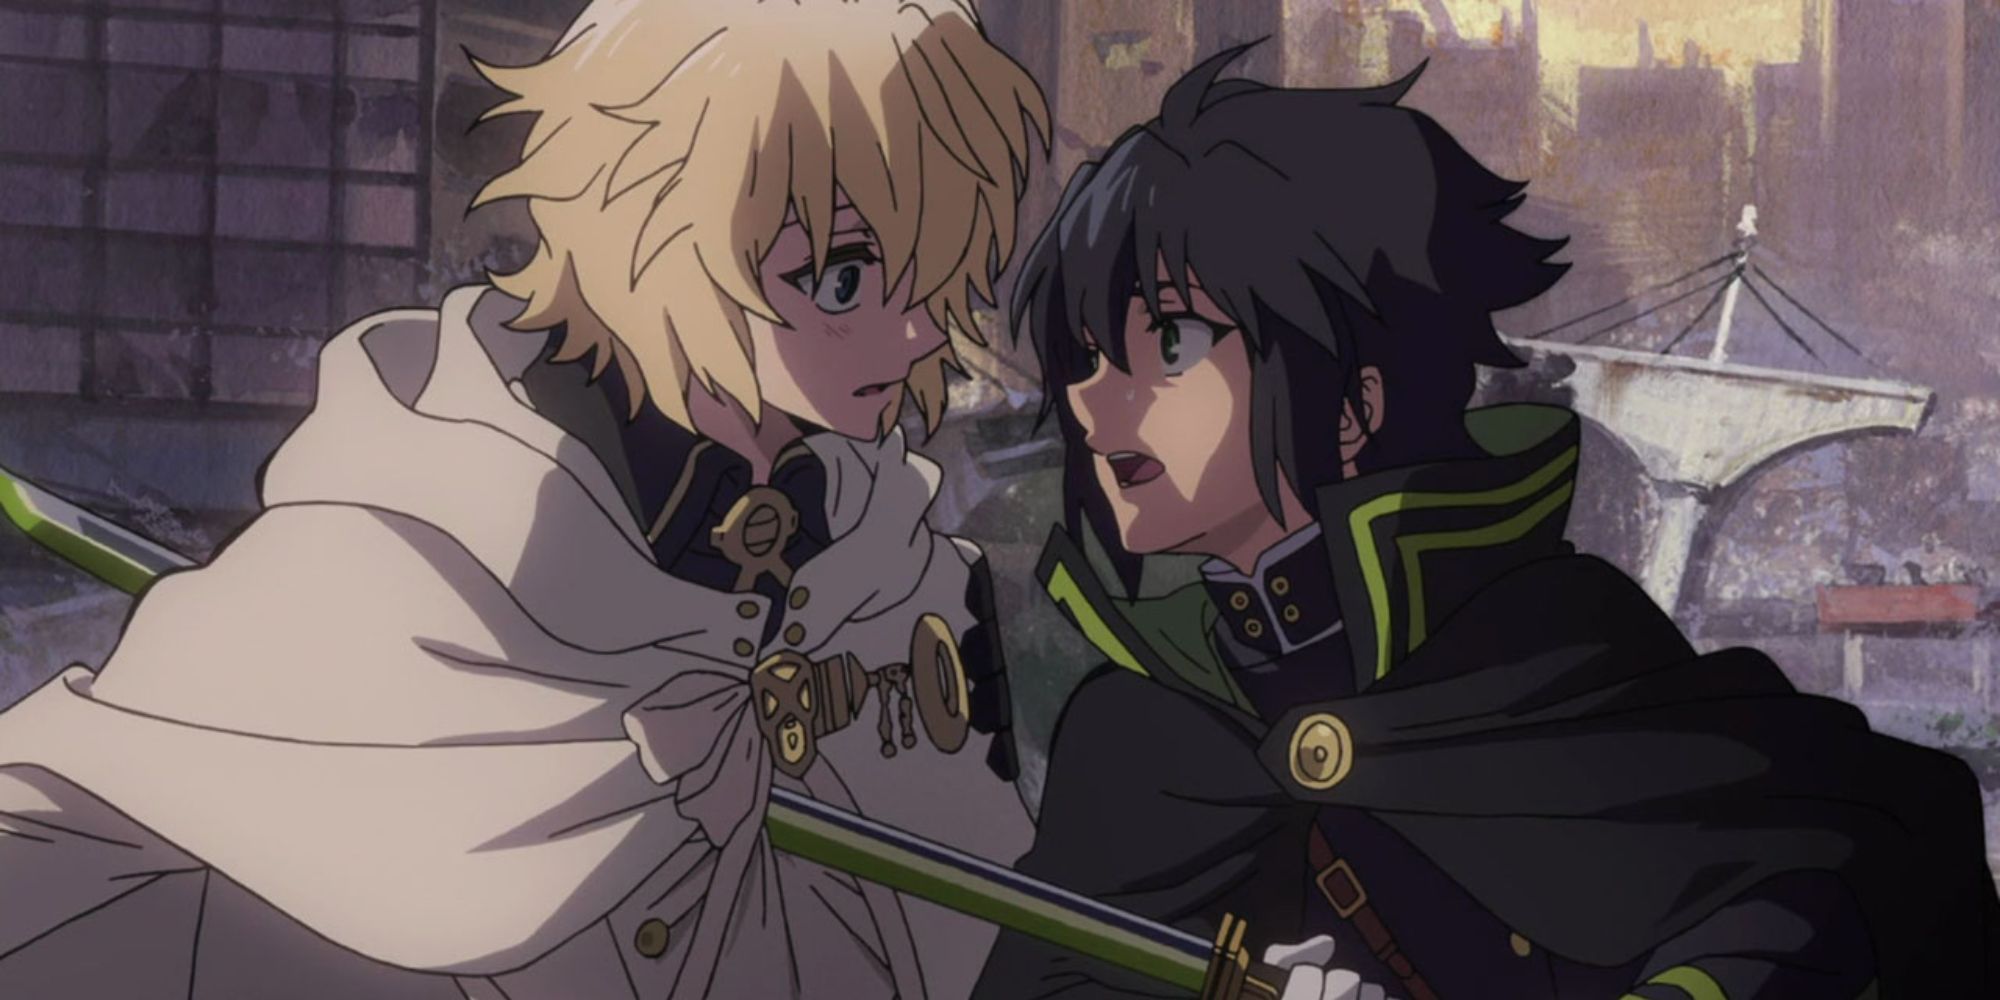 Seraph of the Ends